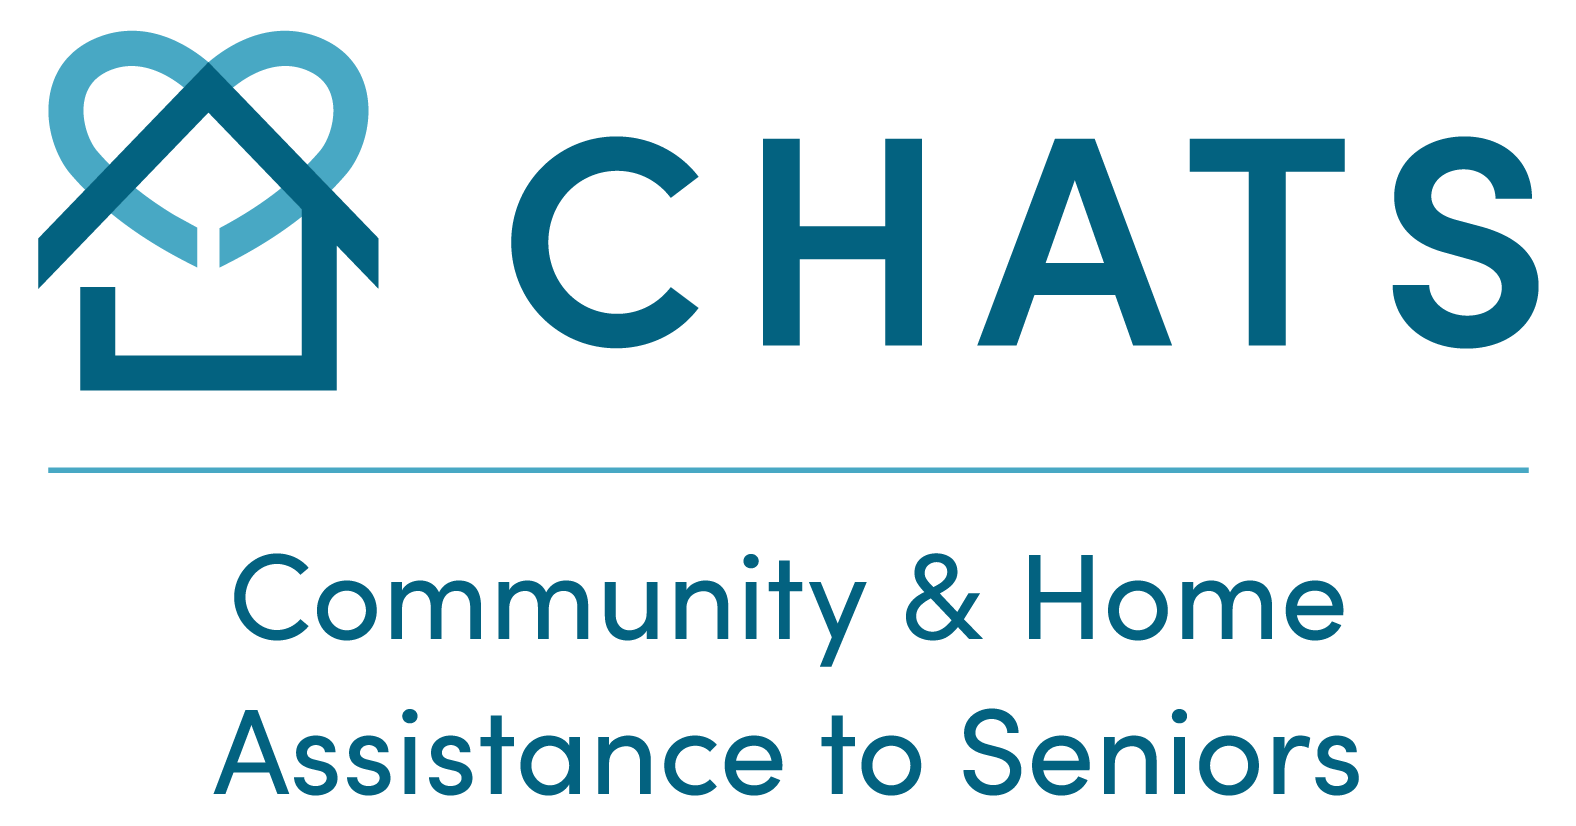 CHATS-COMMUNITY & HOME ASSISTANCE TO SENIORS logo